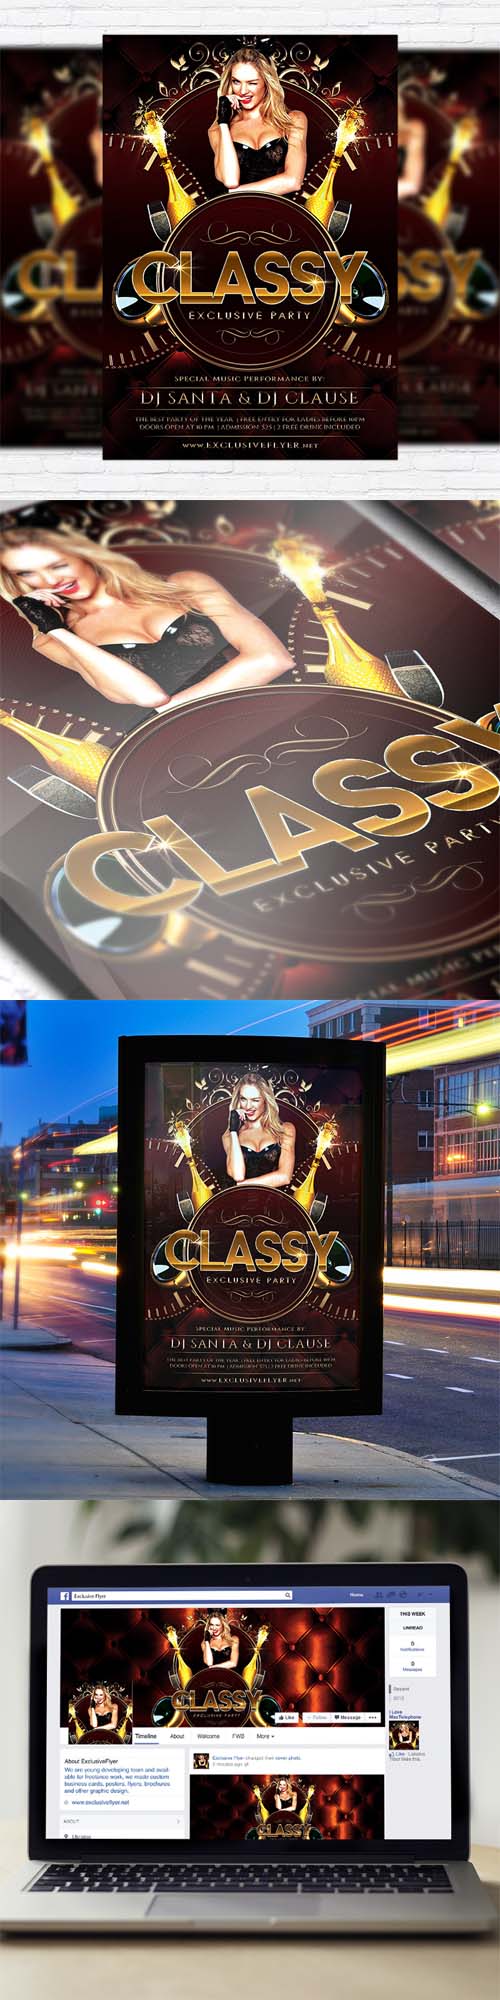 Flyer Template - Exclusive Classy Night + Facebook Cover